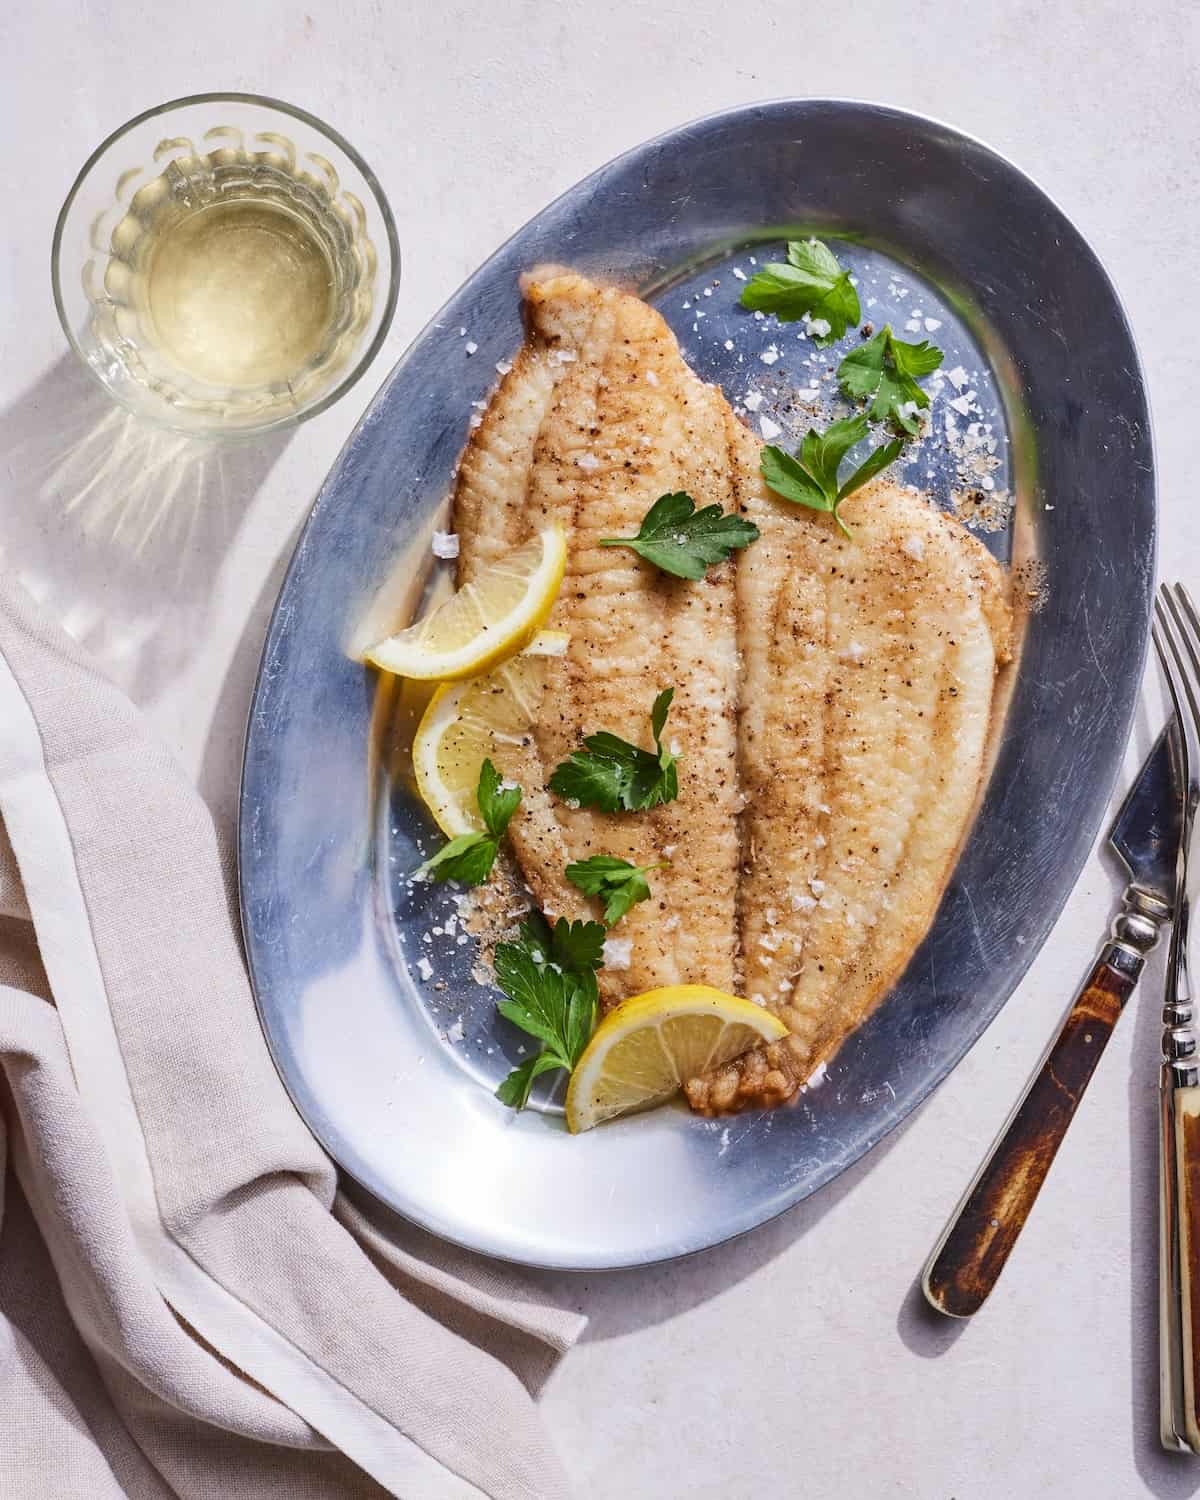 An oval blue platter with pan fried sole garnished with parsley and lemon wedges, with a fork and knife on the side, a glass with a drink in it, and a kitchen towel on the side.